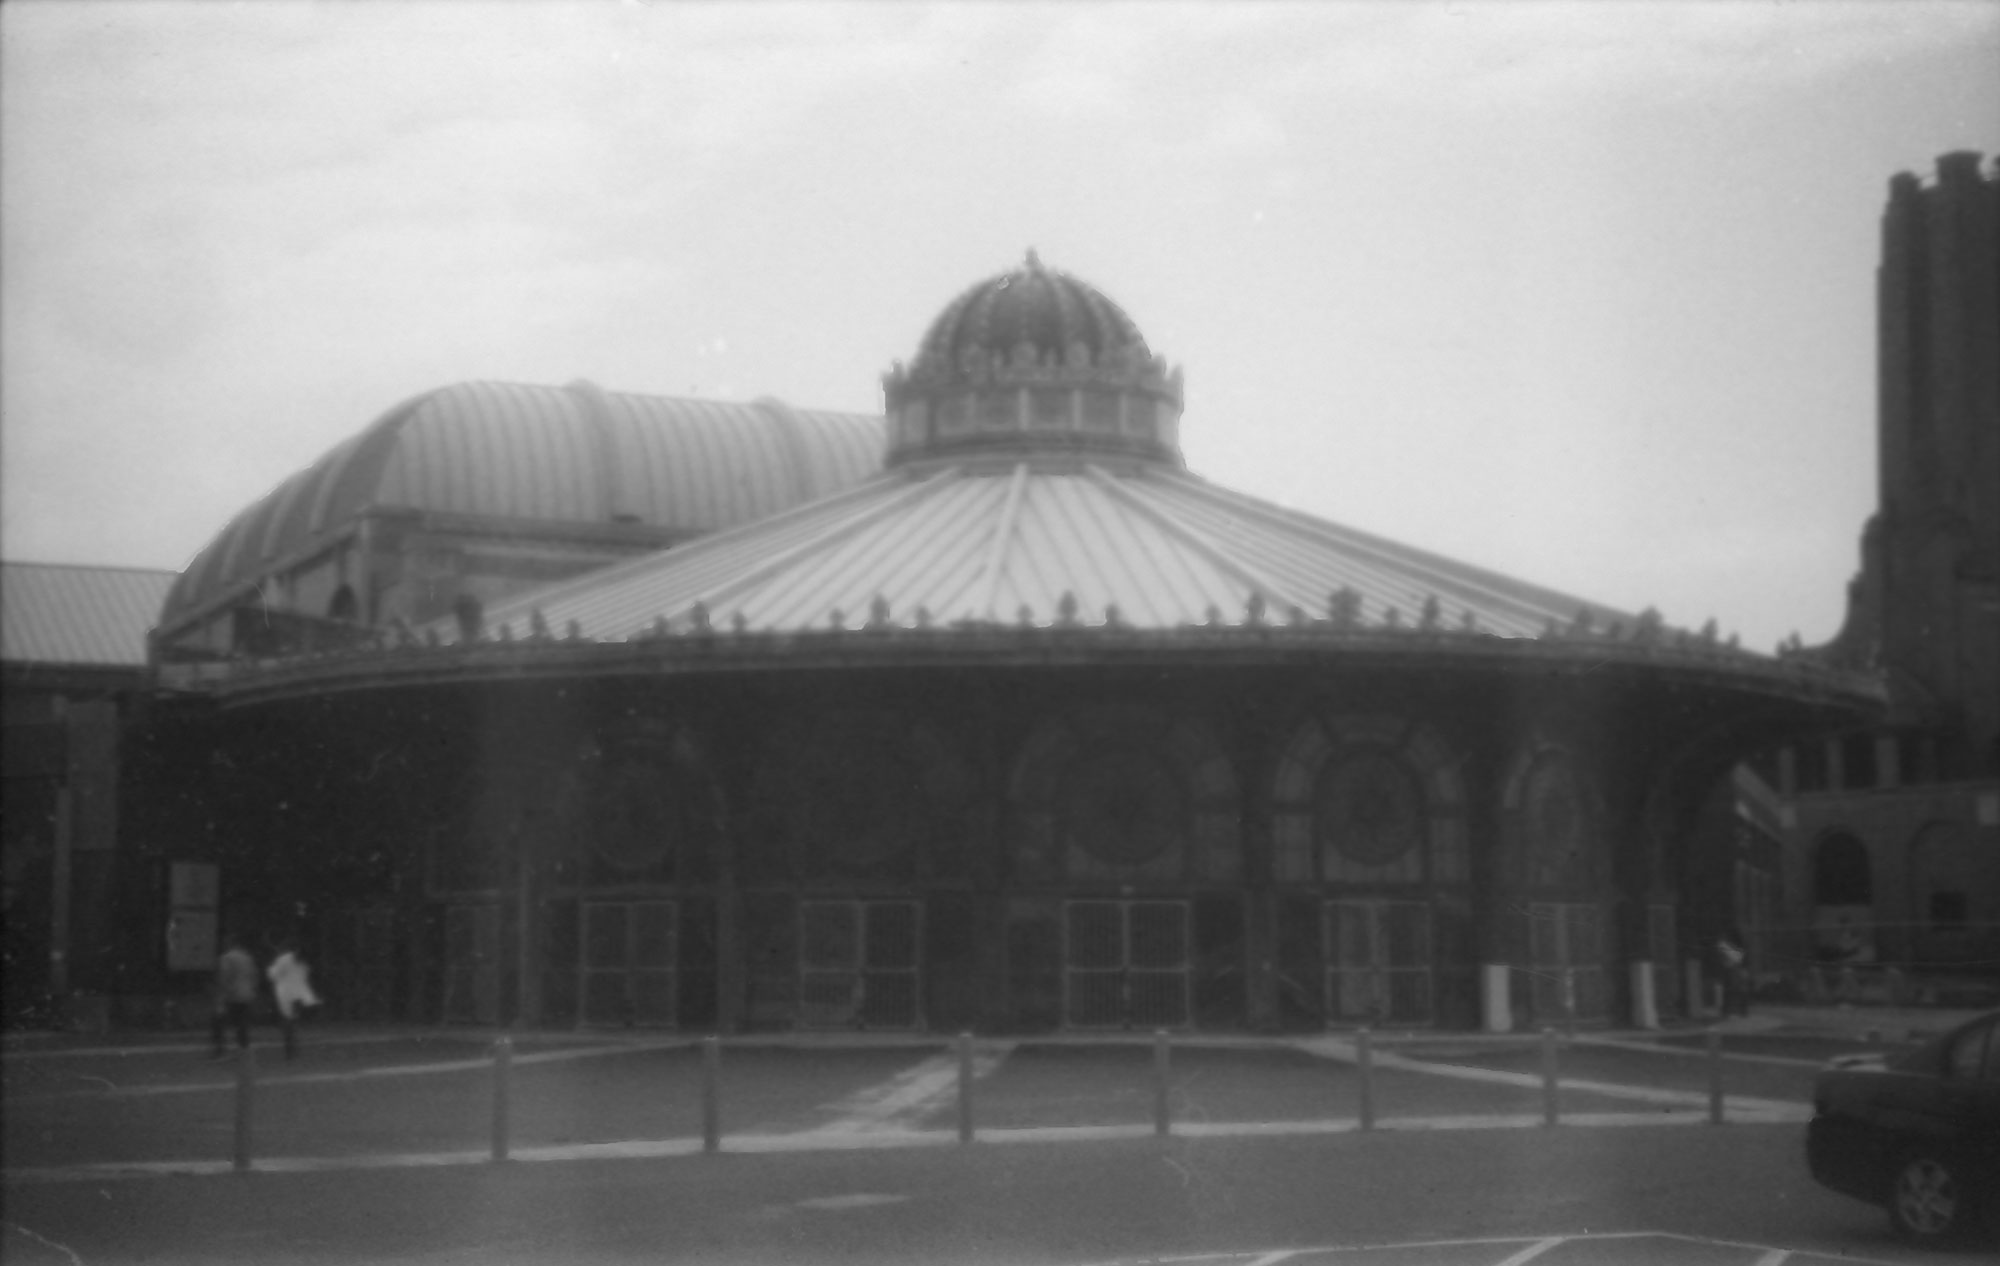 The carousel building on the boardwalk in Asbury Park